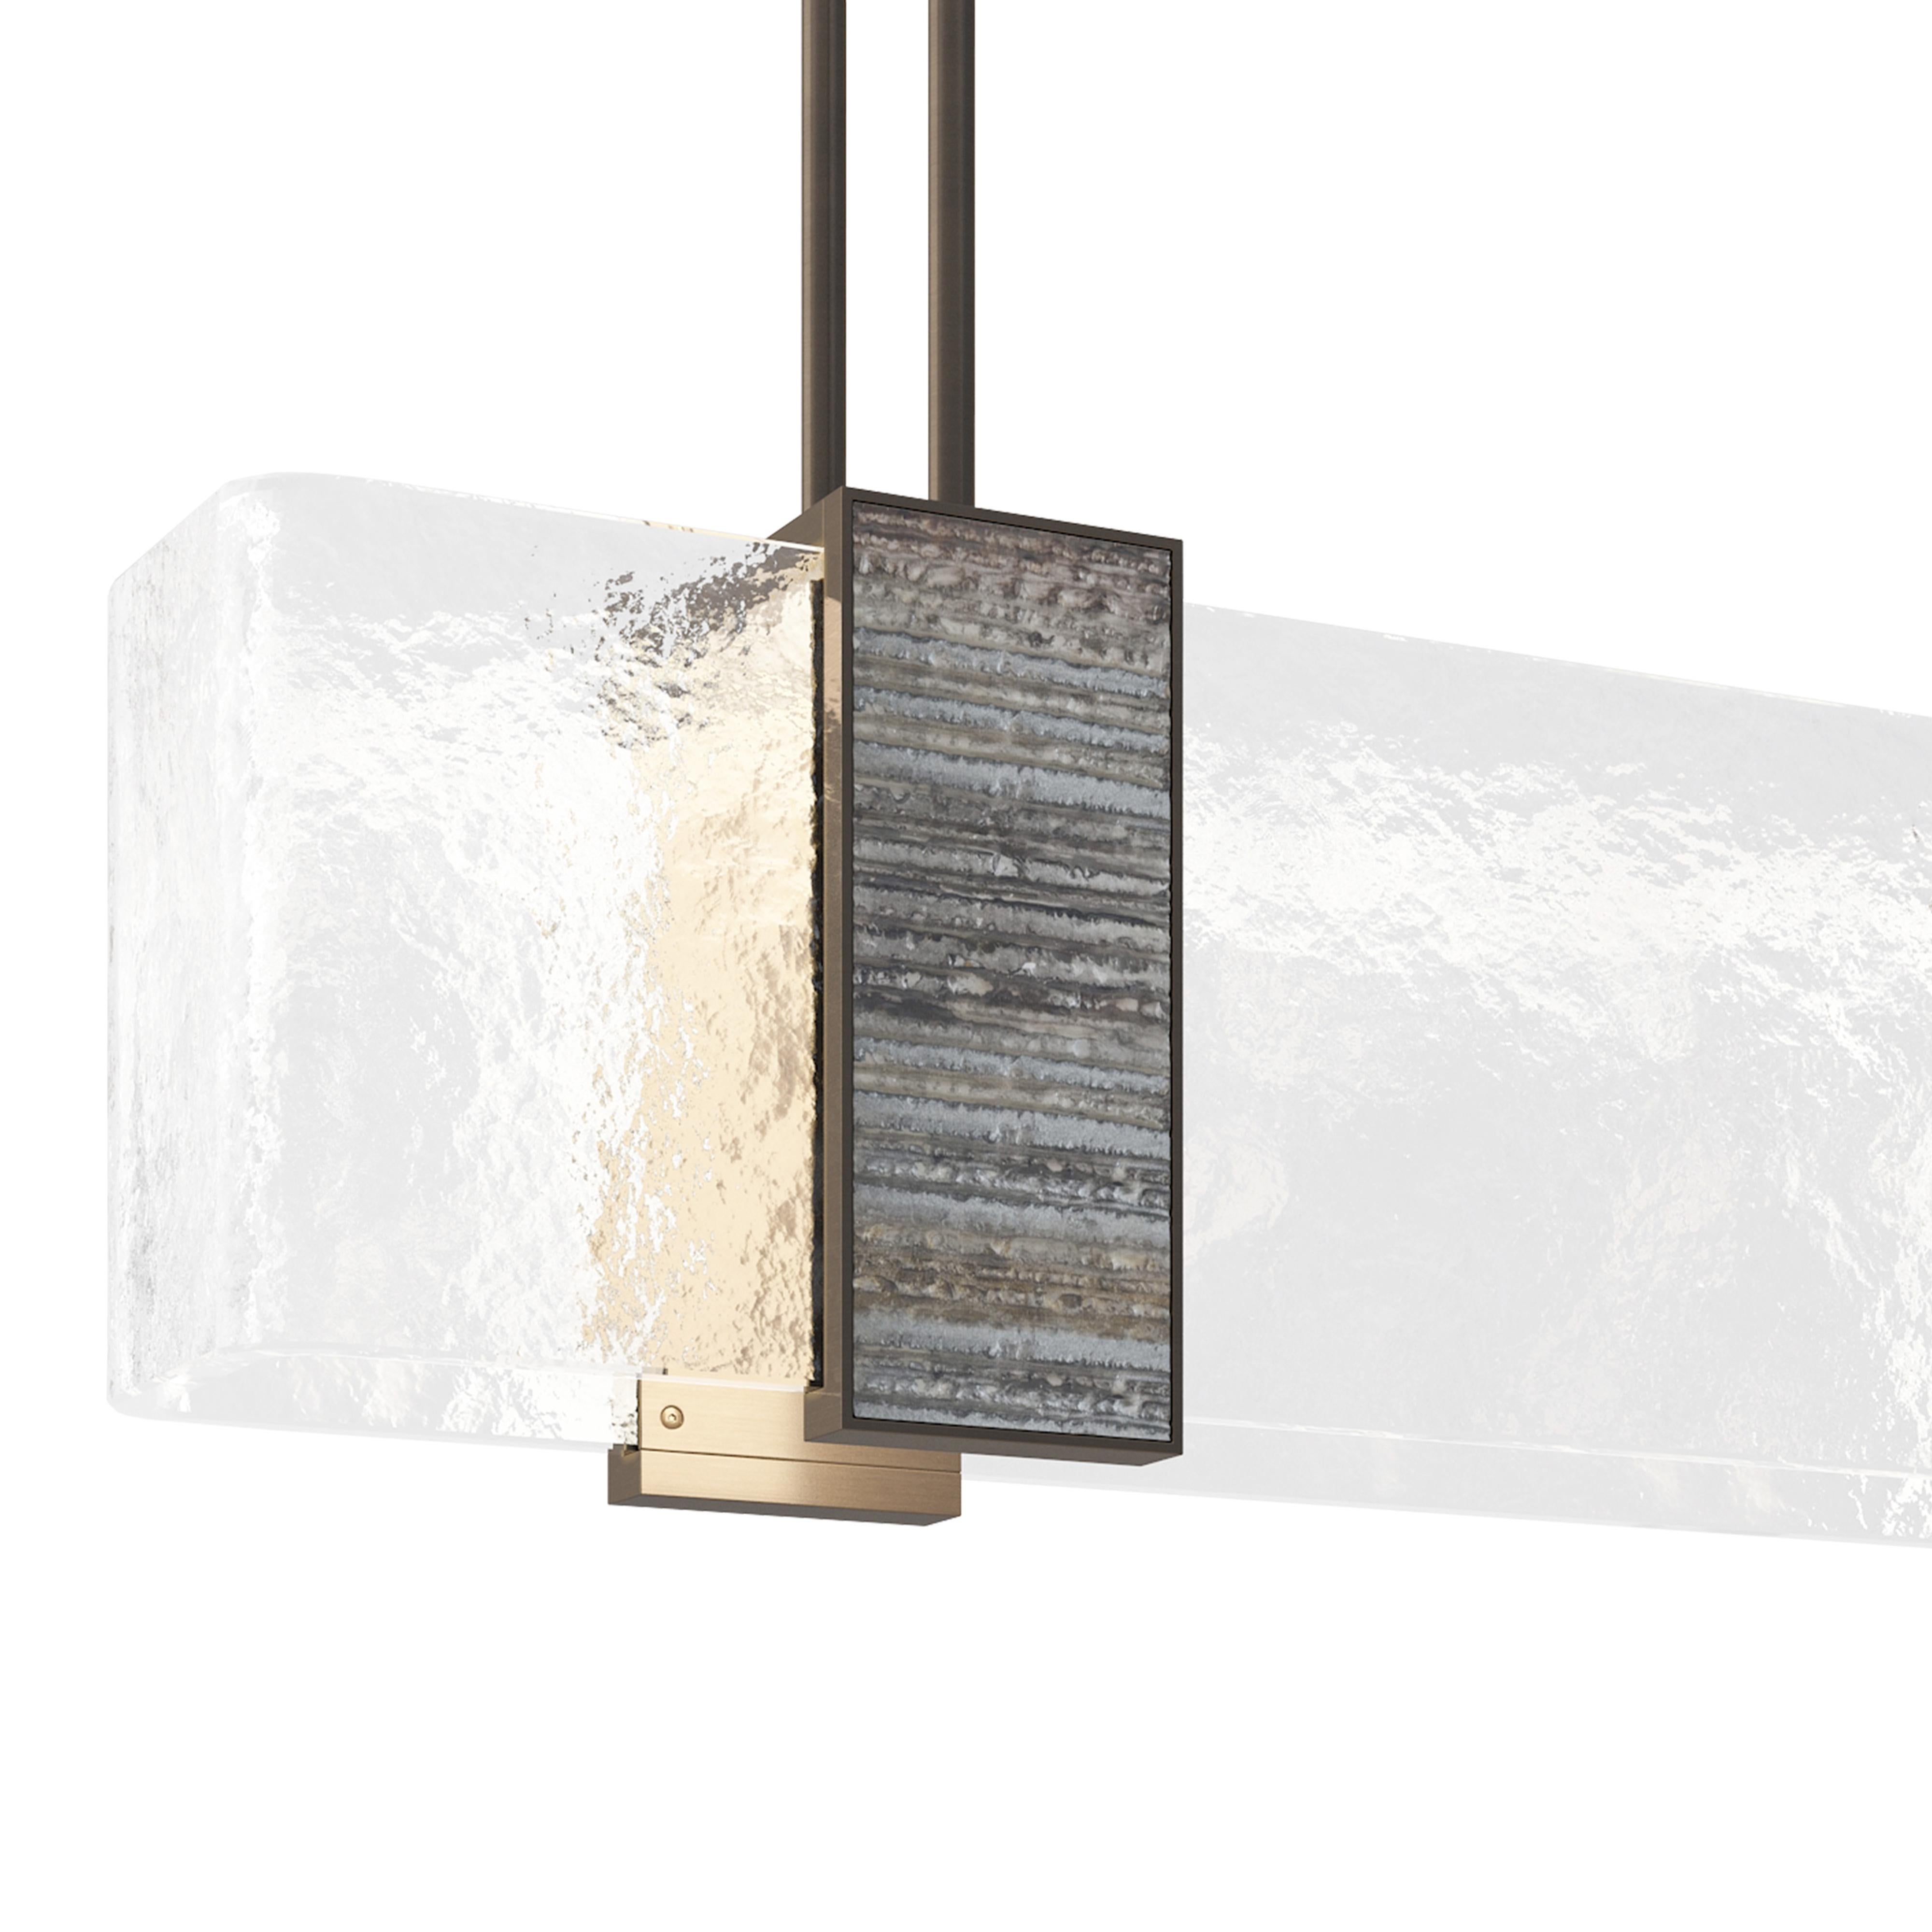 Lillian Gorbachincky's Limited edition Aurora light fixture featuring signature art glass, cast glass, and bronze designed and fabricated by Lillian Gorbachincky Atelier.

Overall dimensions: 72